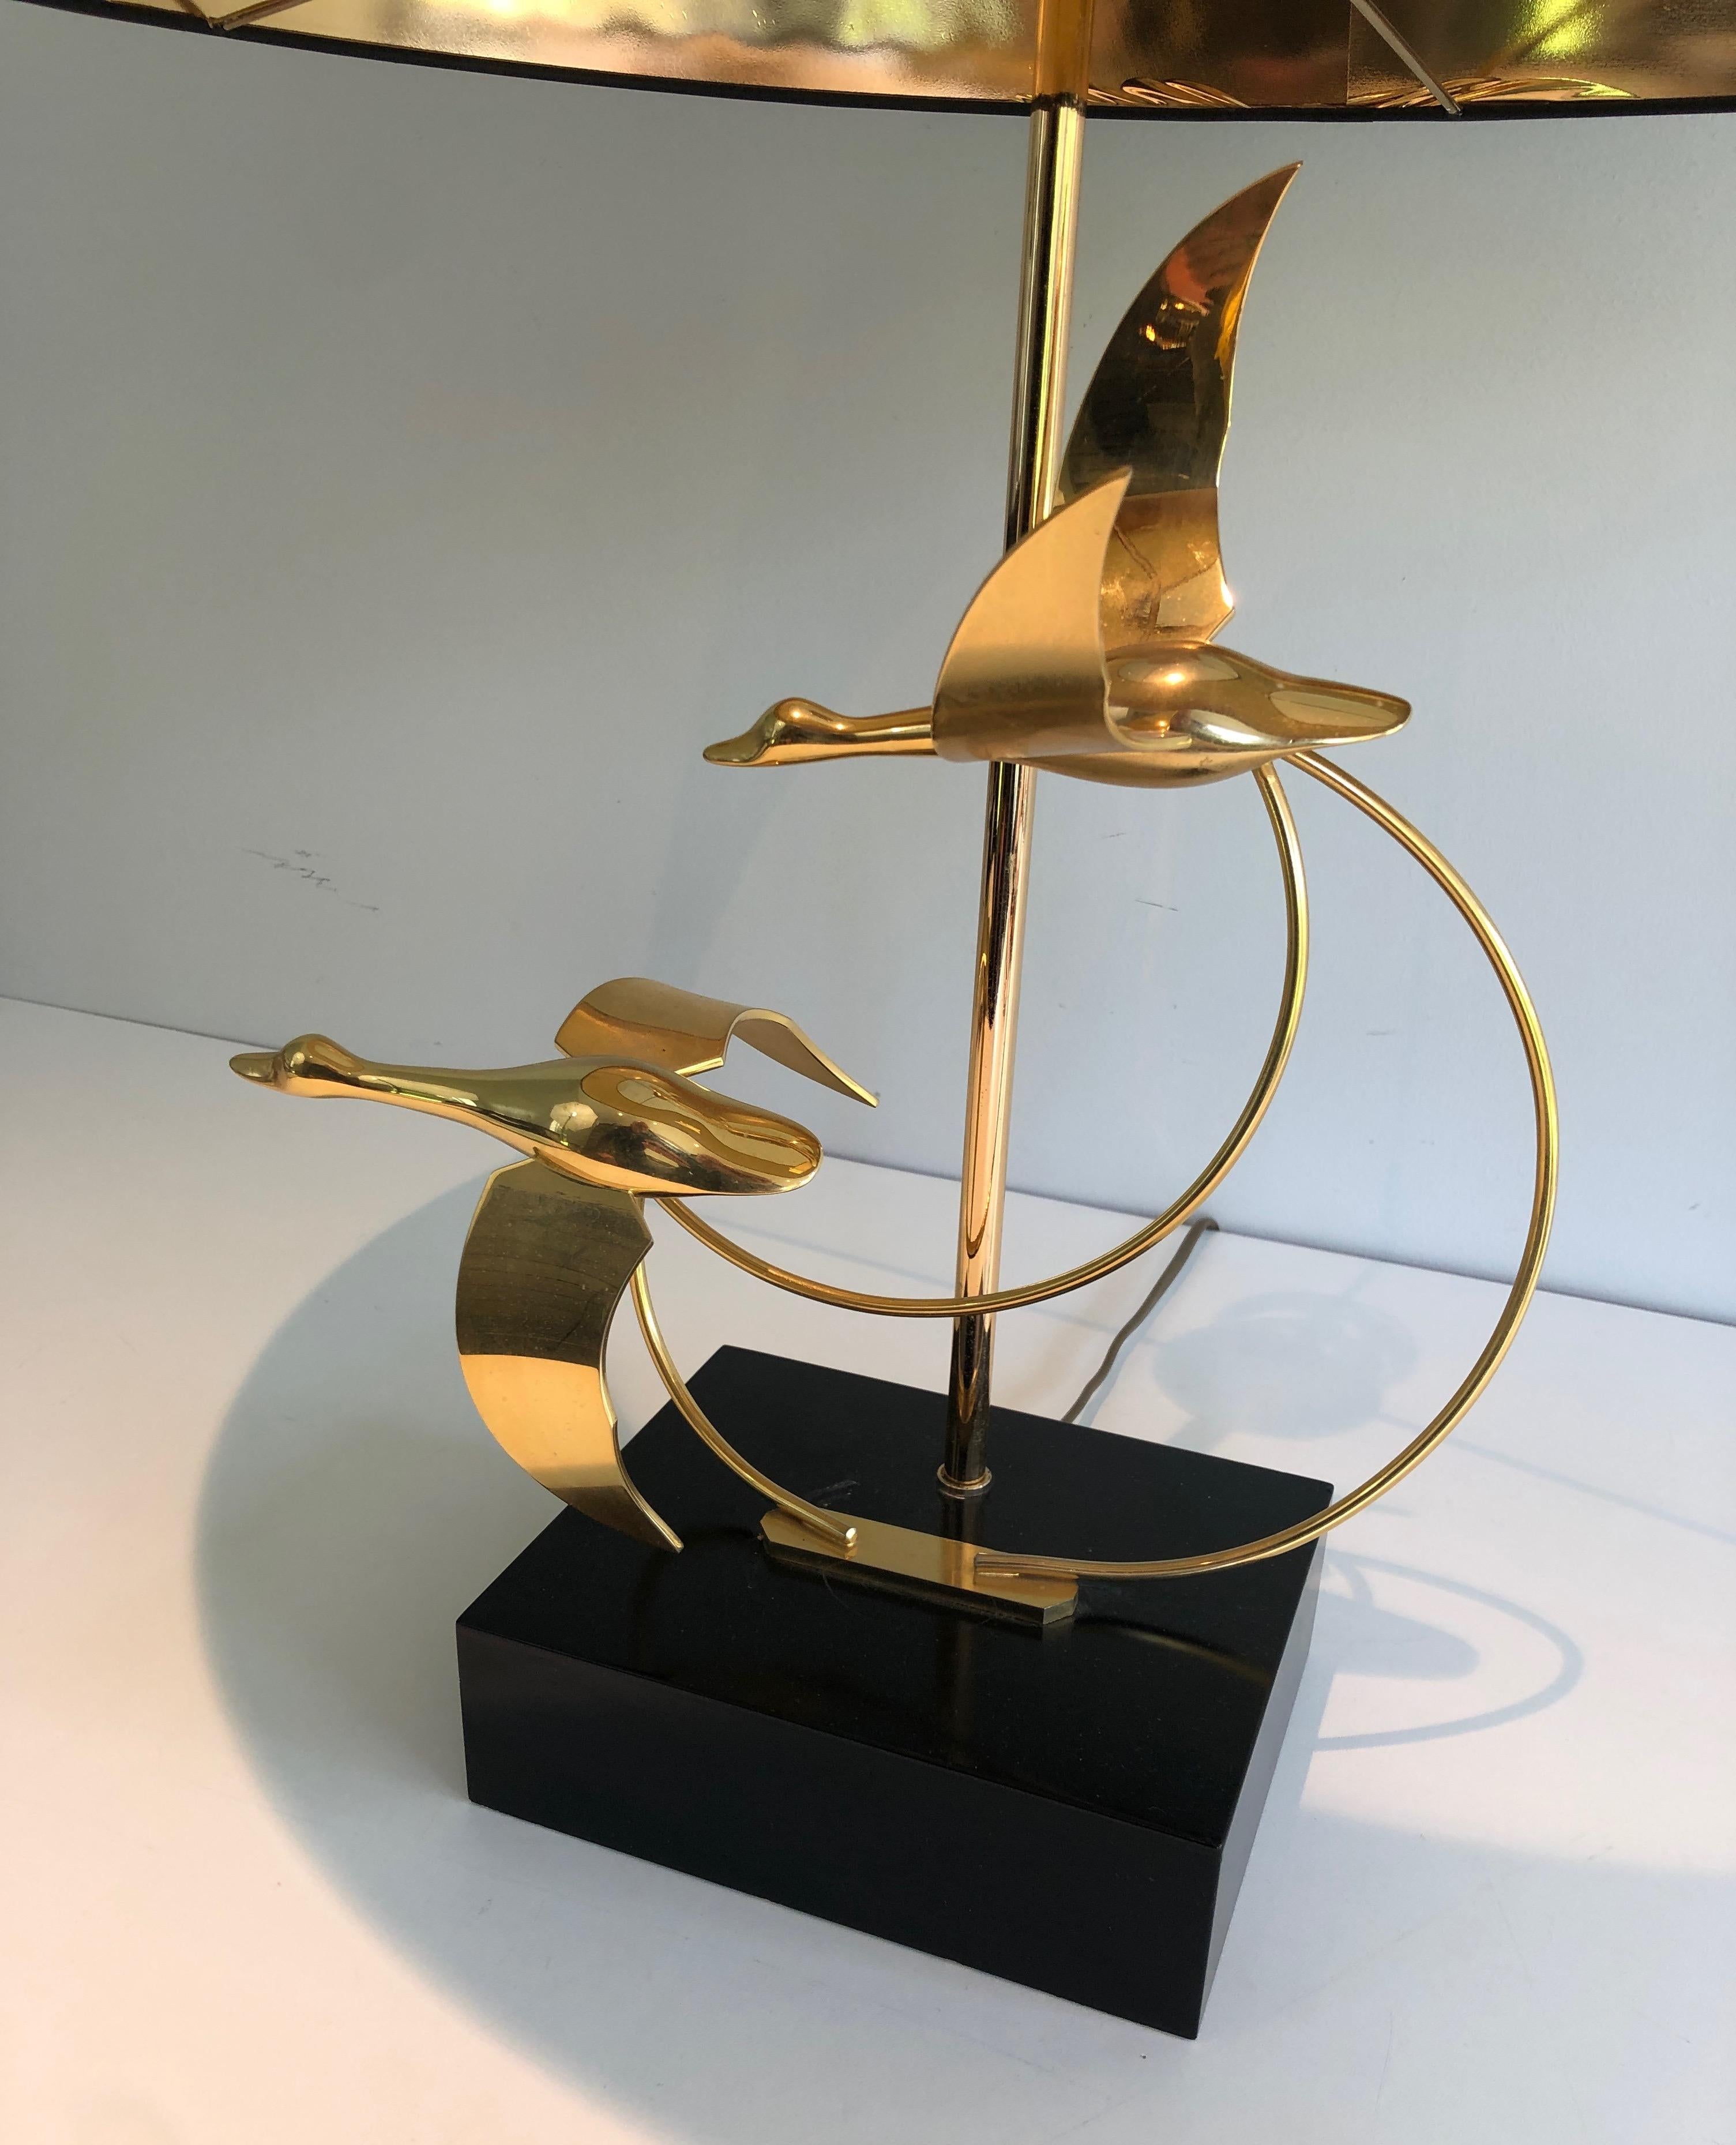 Flock of Wild Geese Brass Table Lamp, French, circa 1970 For Sale 2